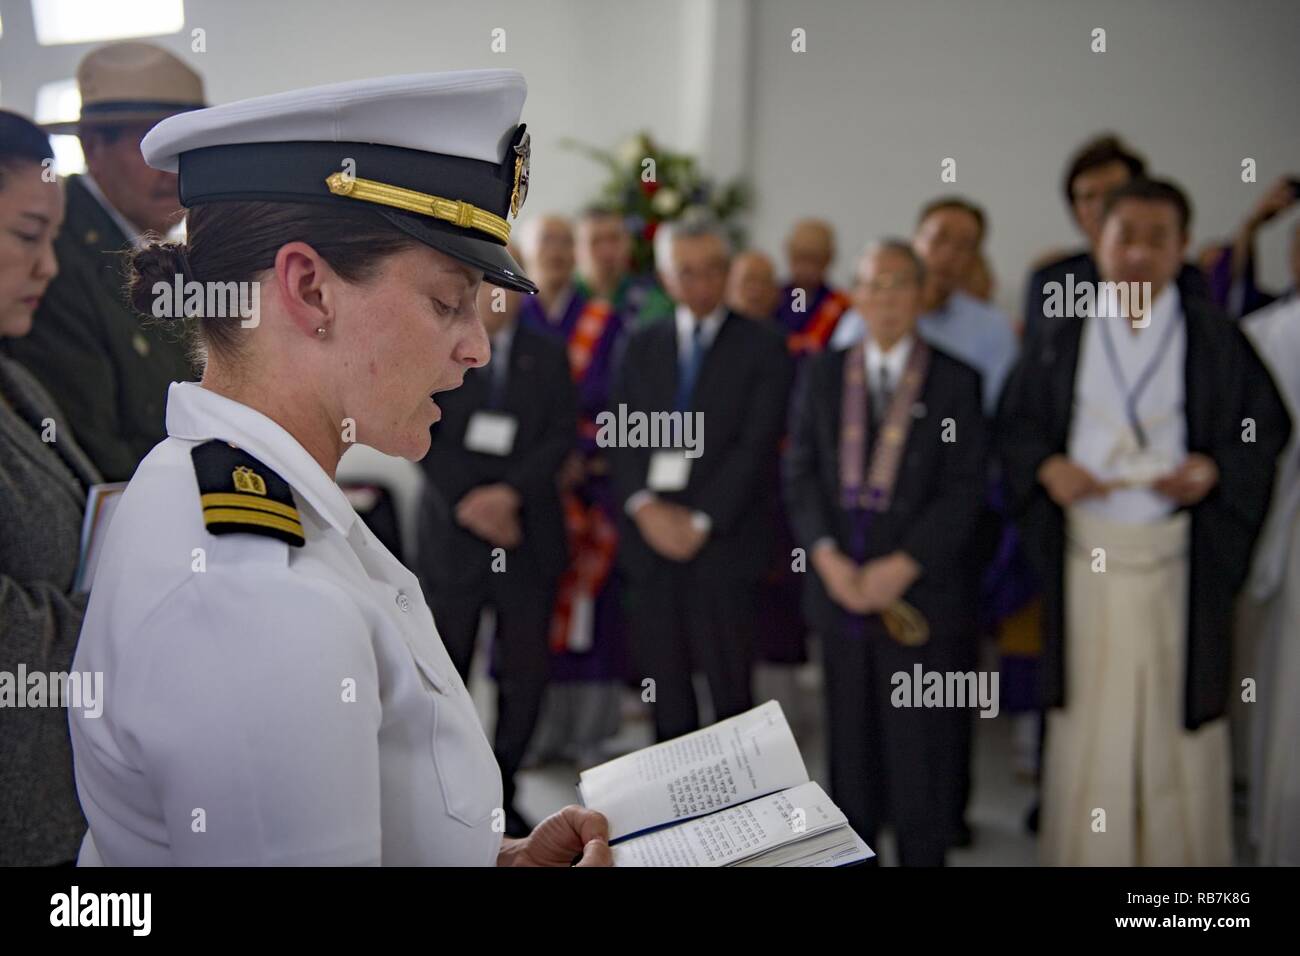 PEARL HARBOR (Dec. 6, 2016) Lt. Emily Rosenzweig, a chaplain assigned to 3rd Radio Battalion Religious Ministry Team at Marine Corps Base Hawaii, reads a Hebrew prayer aboard the USS Arizona Memorial during an Interfaith Prayer service and Floral Tribute. The event allowed religious leaders from the U.S. military, Hawaii, and Japan to engage in prayer to honor the fallen service members. Dec. 7, 2016, marks the 75th anniversary of the attacks on Pearl Harbor and Oahu. Since Dec. 7, 1941, the U.S. and Japan have endured more than 70 years of continued peace, a cornerstone of security and prospe Stock Photo